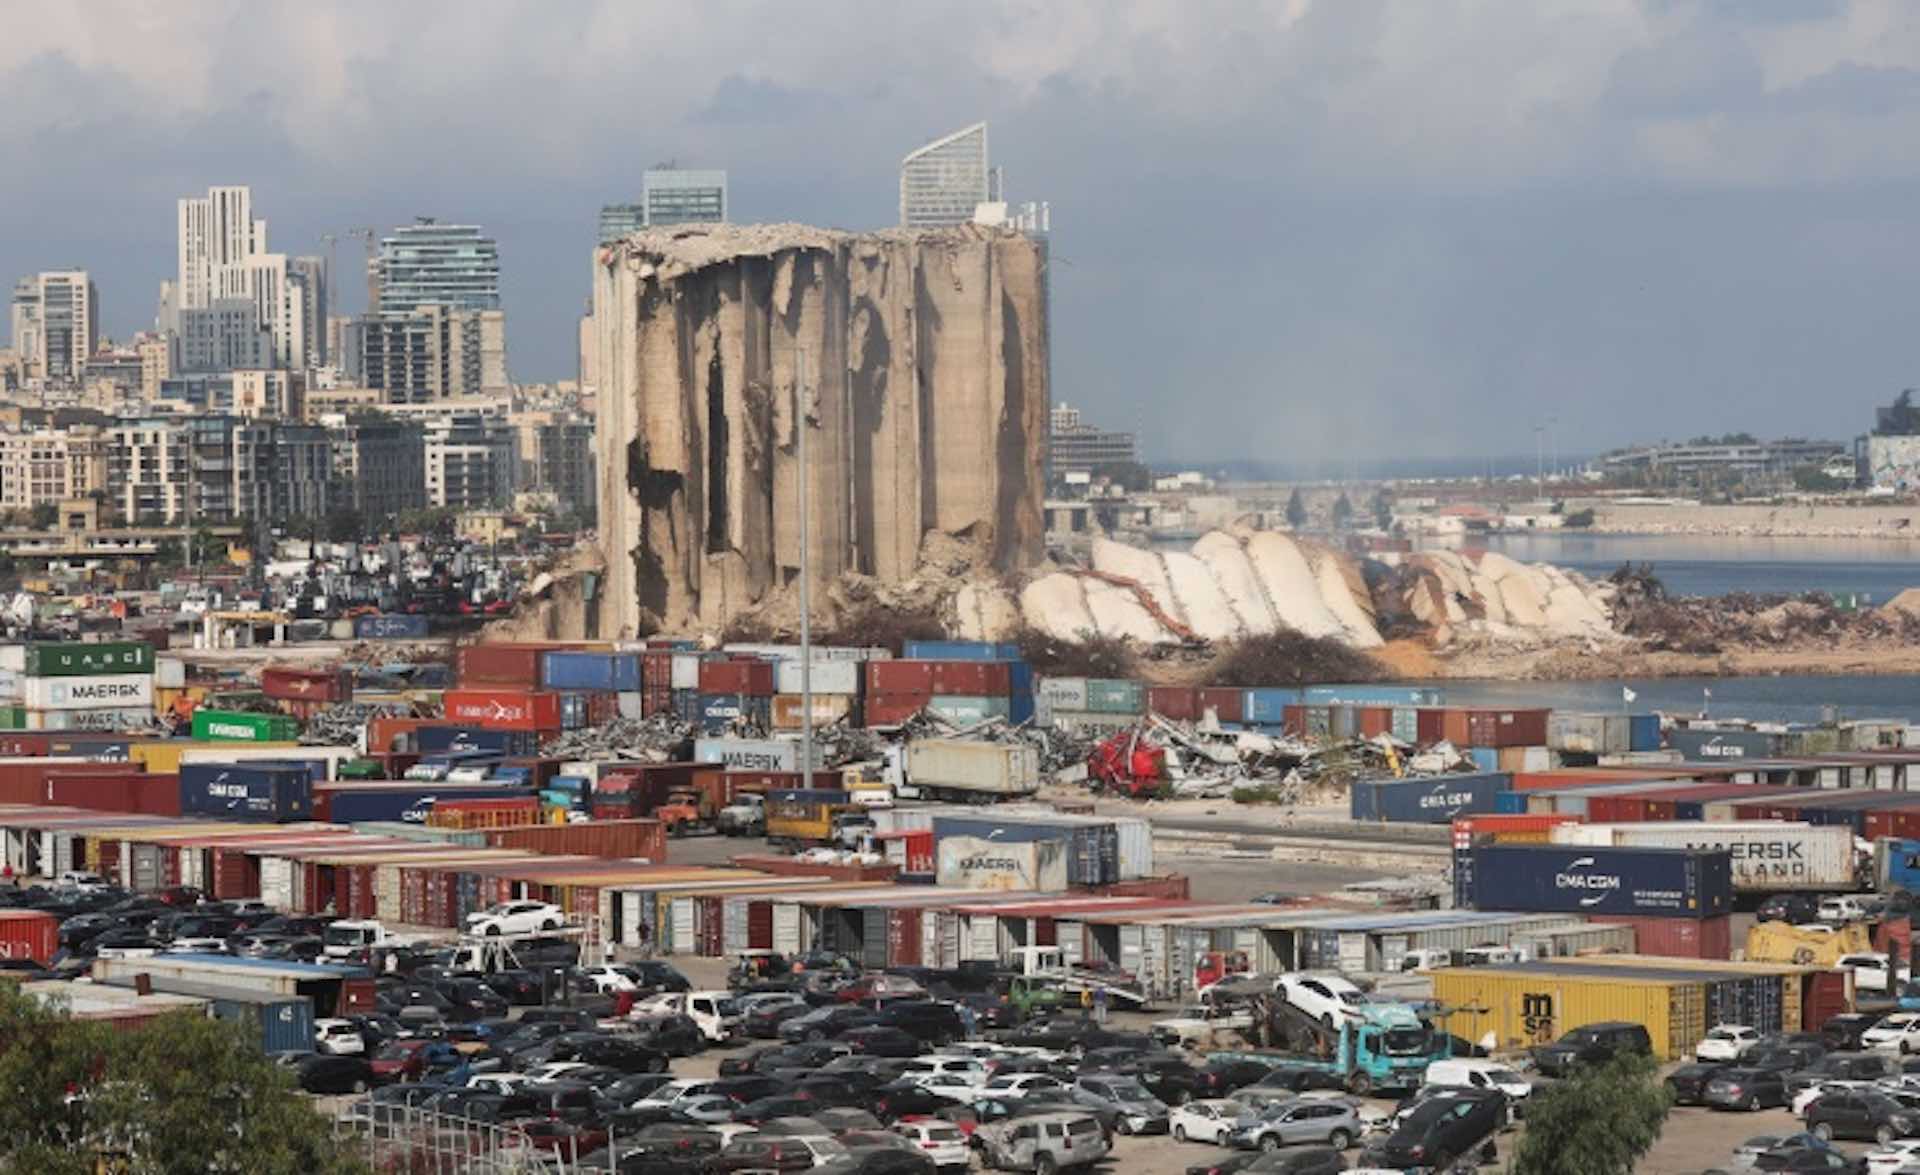 The northern part of the damaged Beirut grain silos collapses